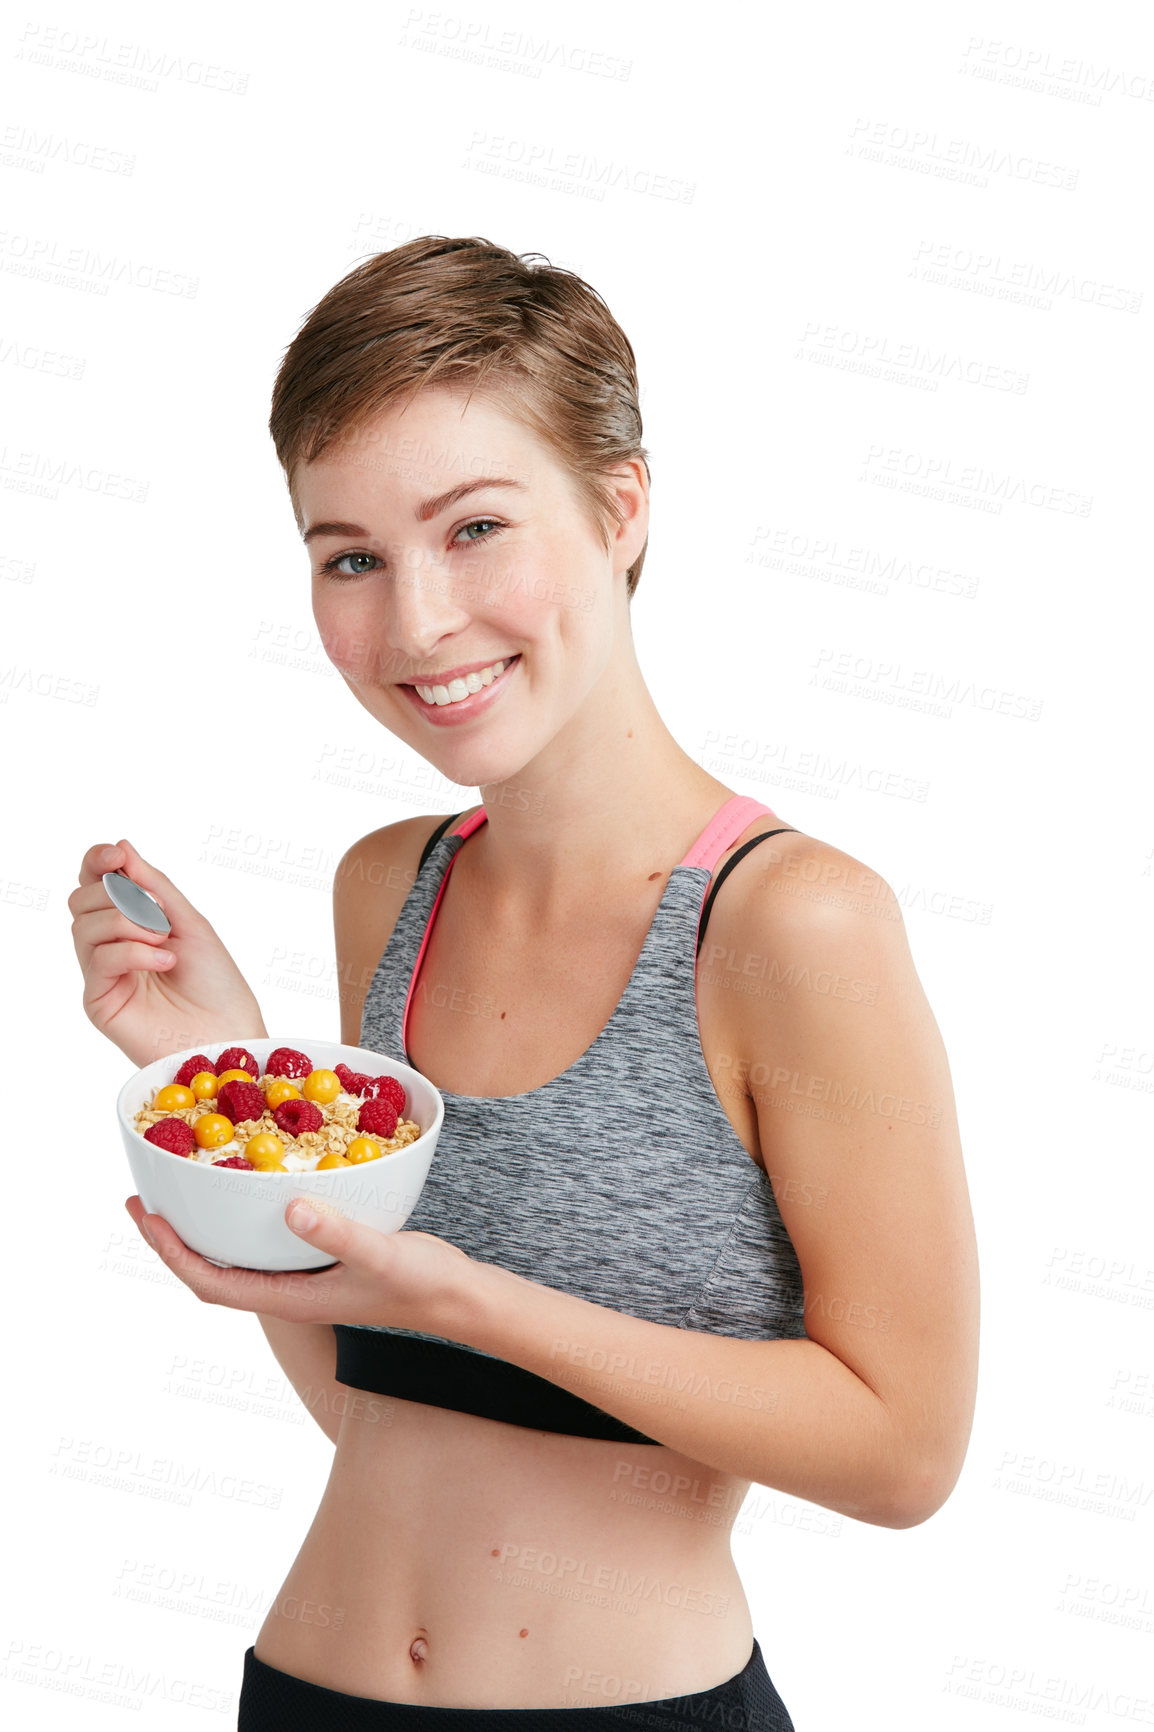 Buy stock photo Studio portrait of a fit young woman eating a bowl of fruit and granola against a white background